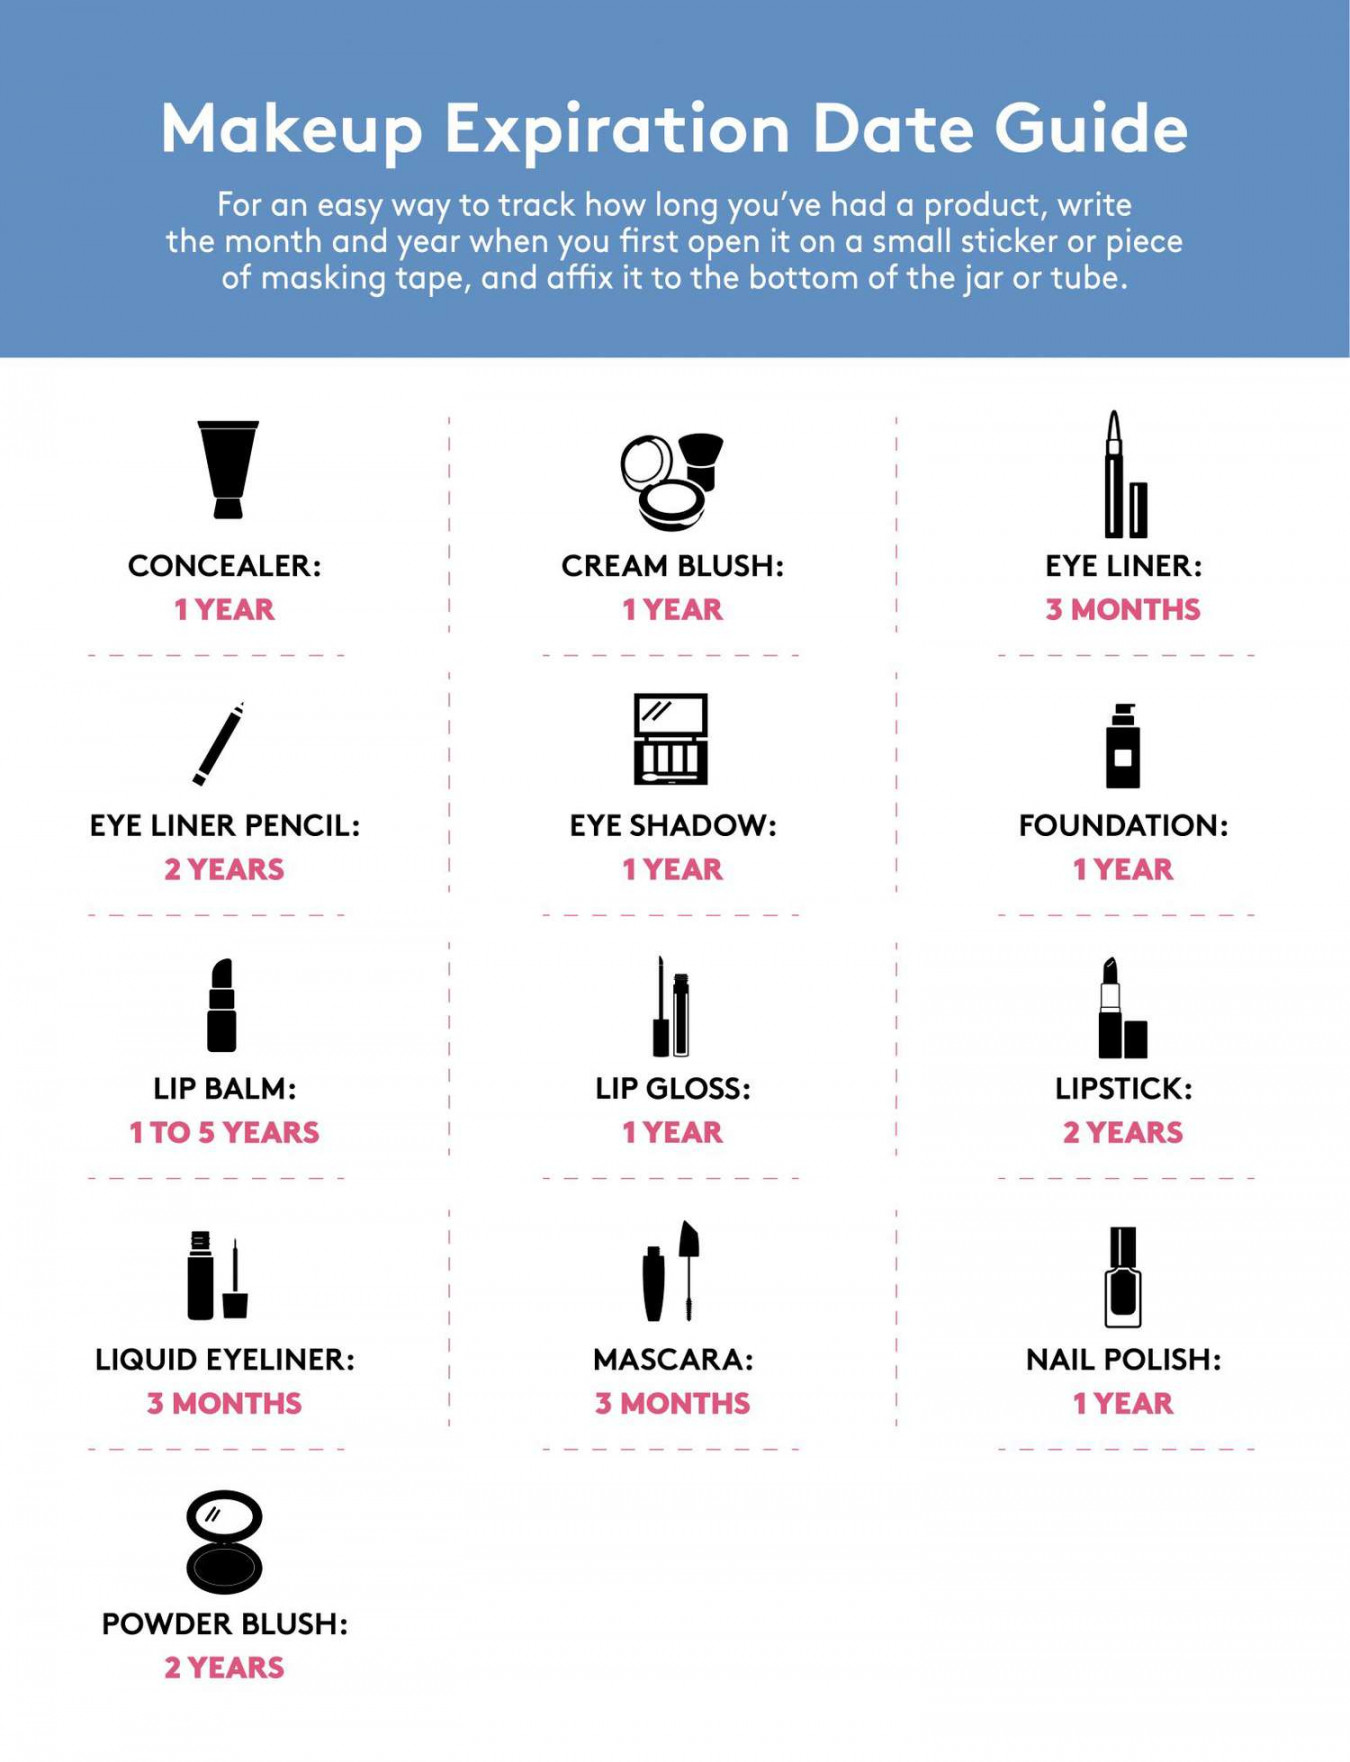 The Complete Guide to Makeup Expiration Dates: When to Throw Out